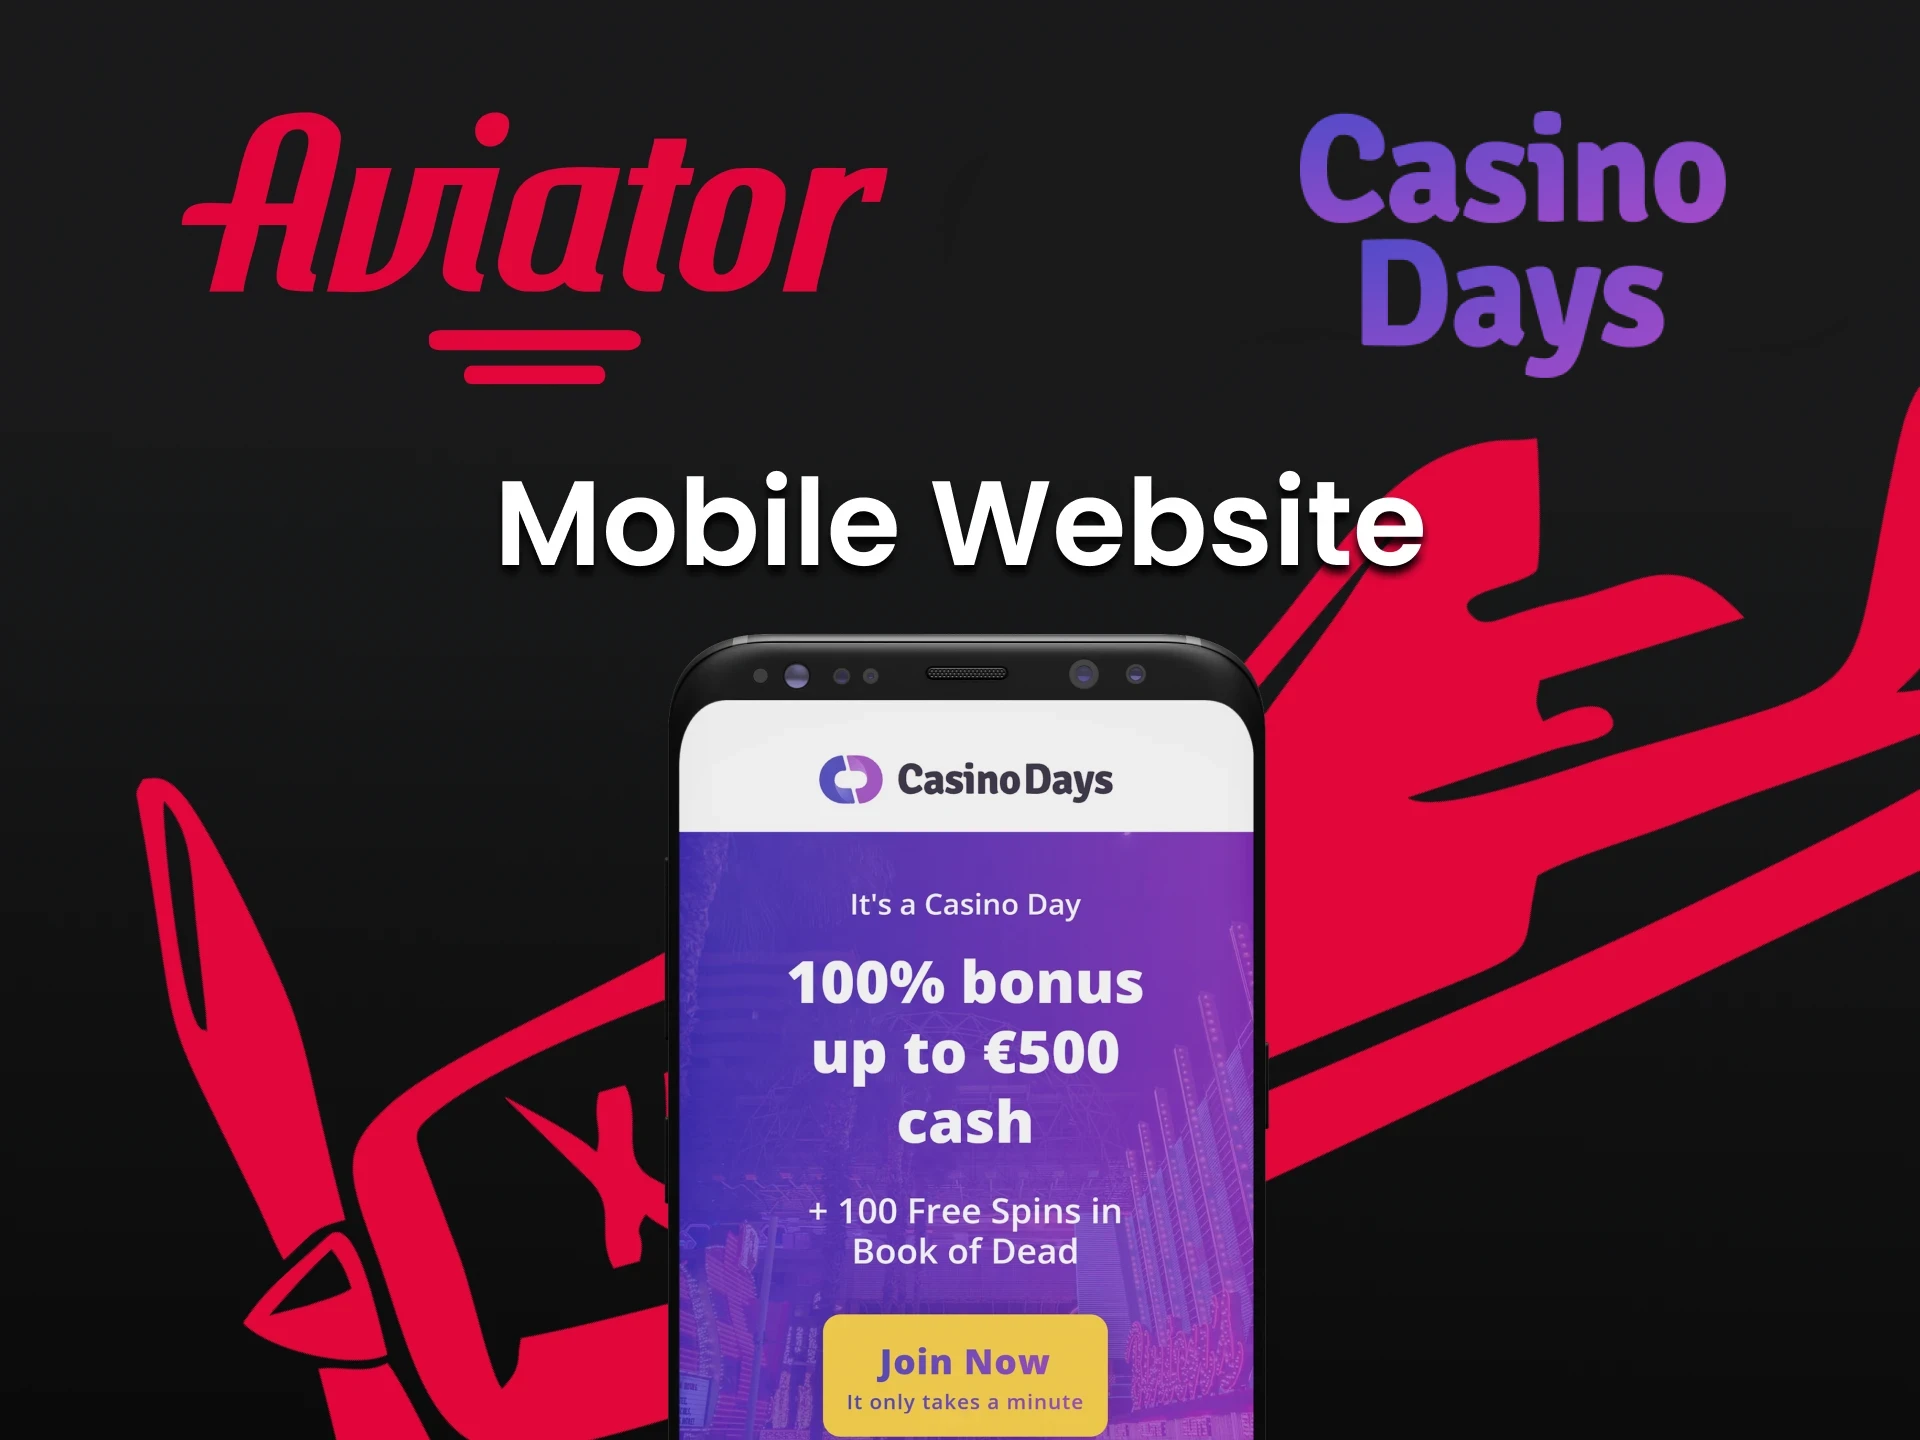 Visit the mobile version of the Casino Days website to play Aviator.